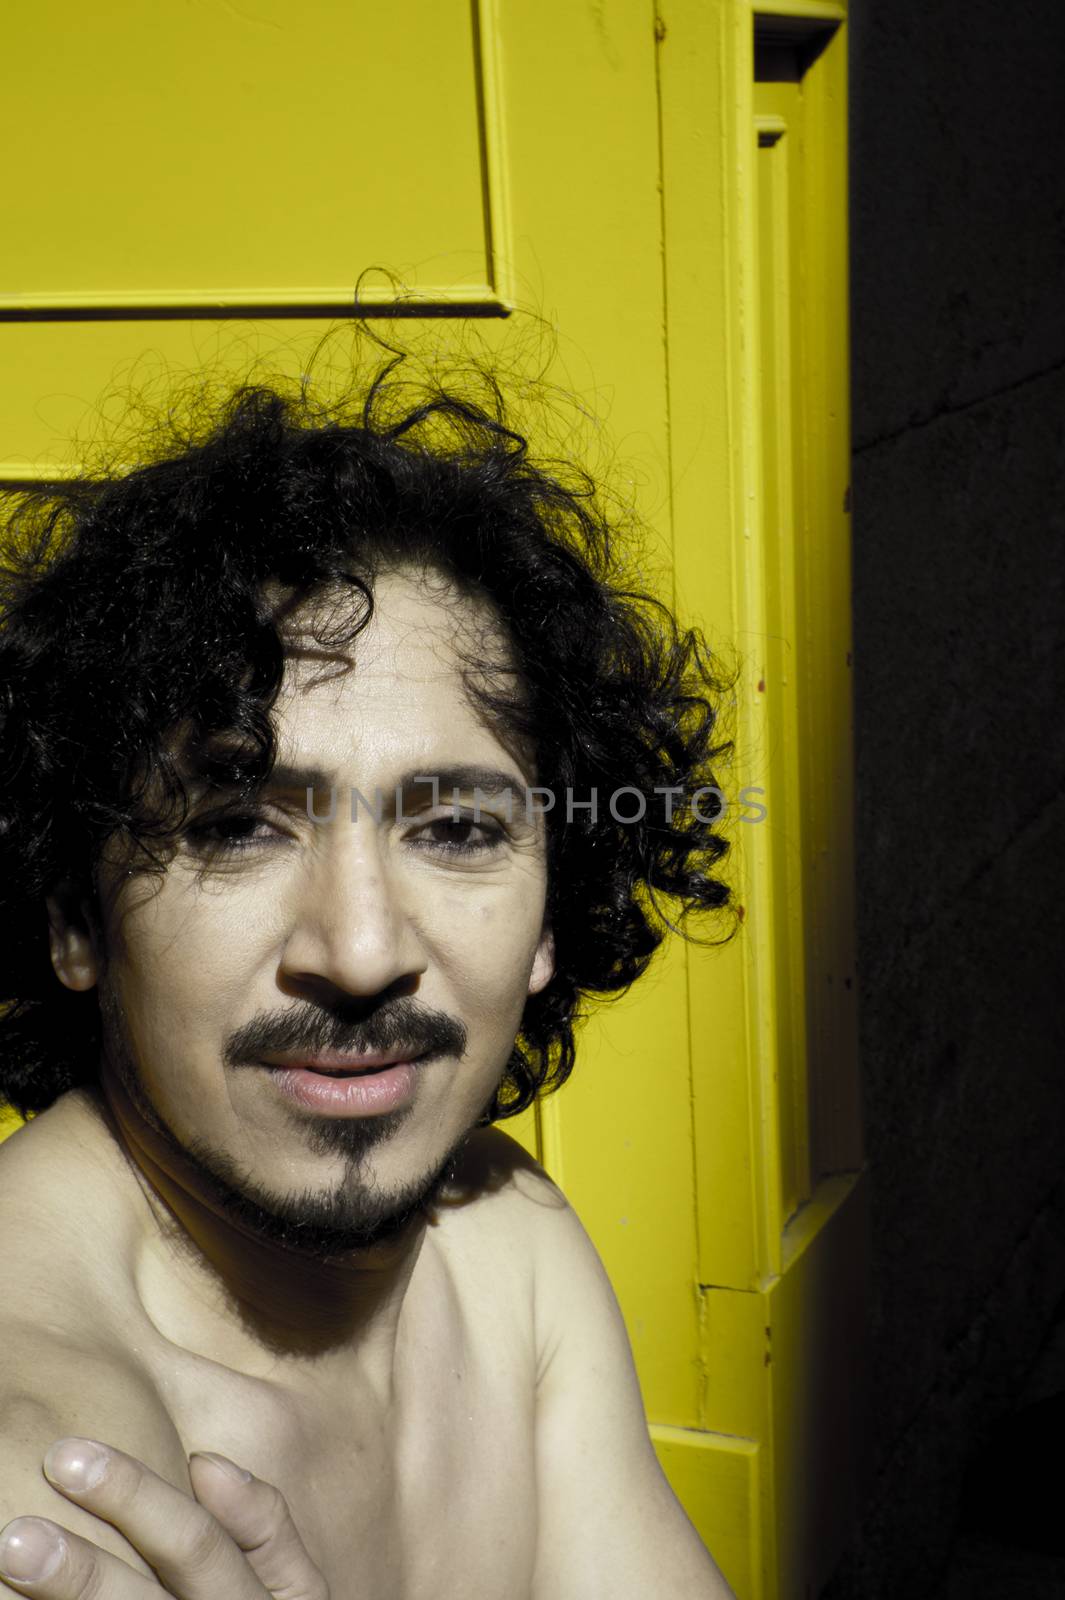 Portrait of latin man with beard and curly black hair. Naked torso